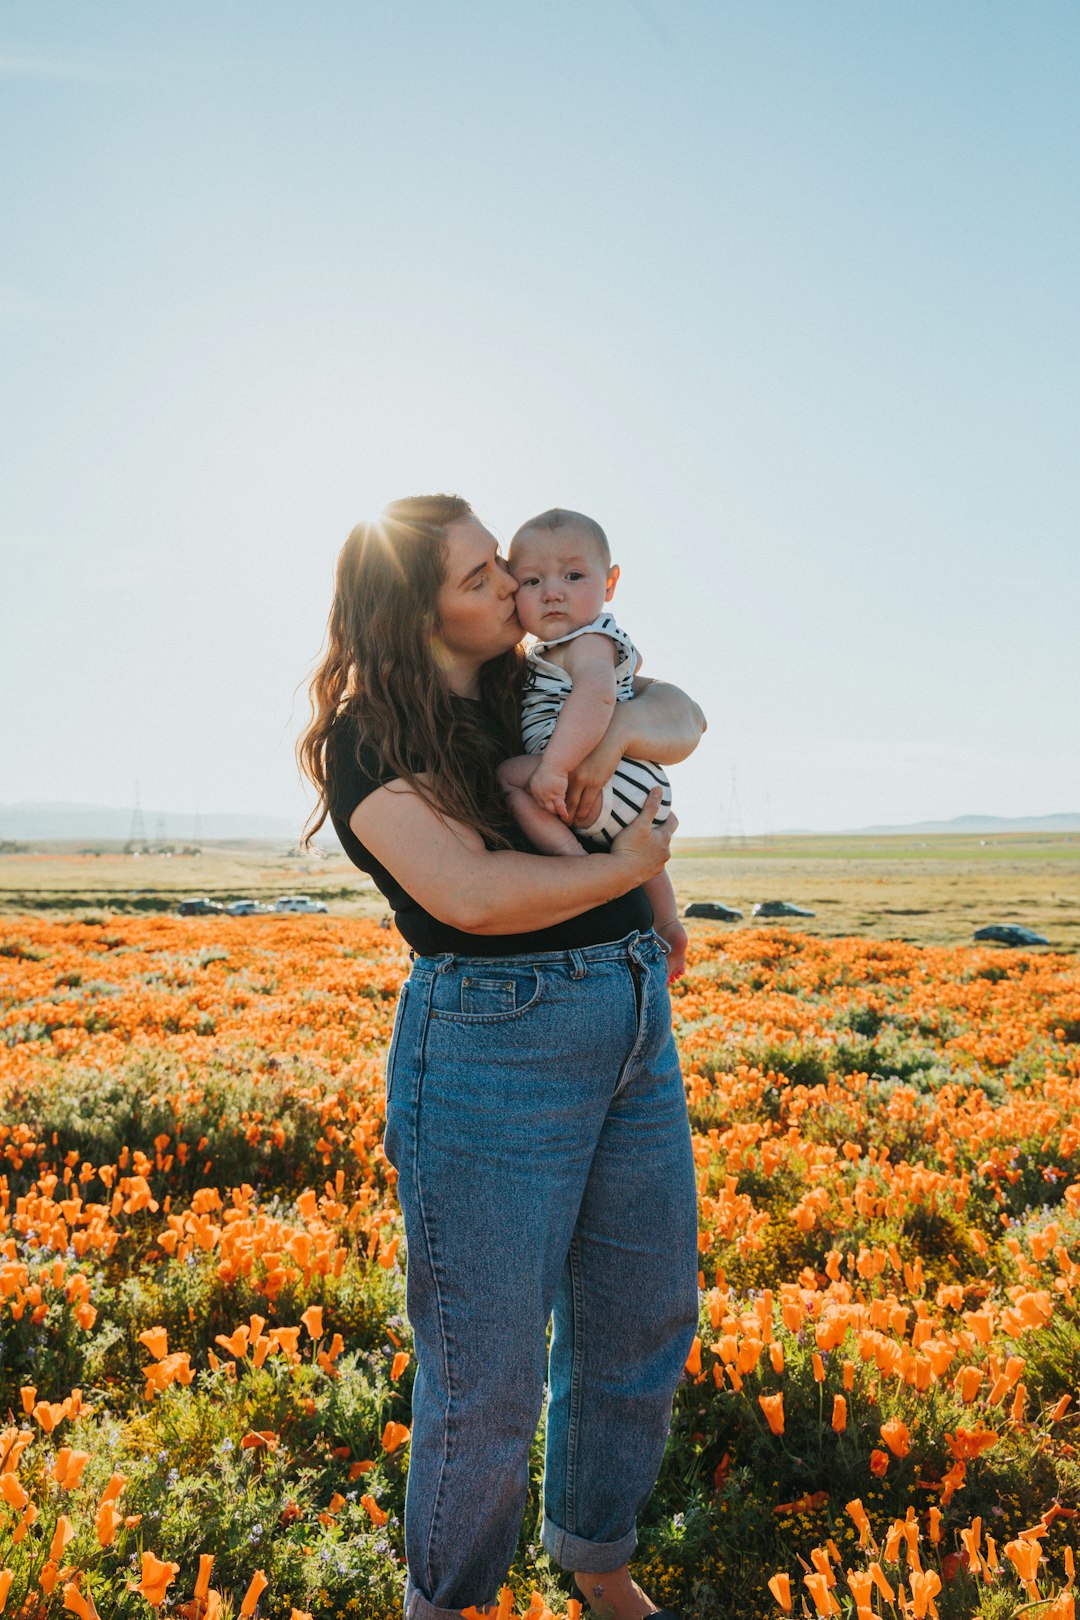 woman in black tank top carrying baby in white shirt on flower field during daytime